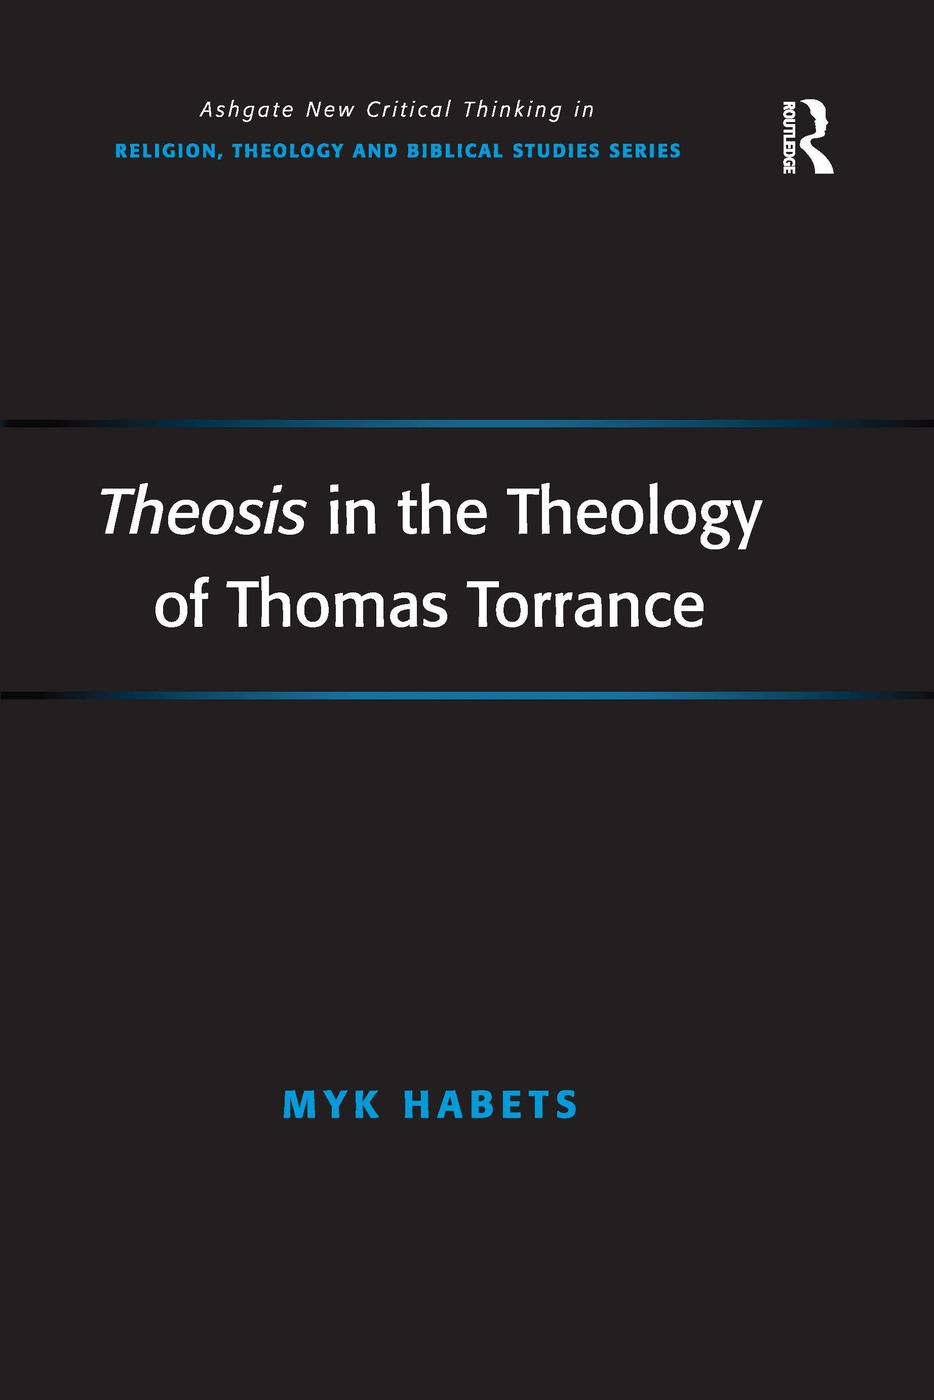 Theosis in the Theology of Thomas Torrance. Myk Habets